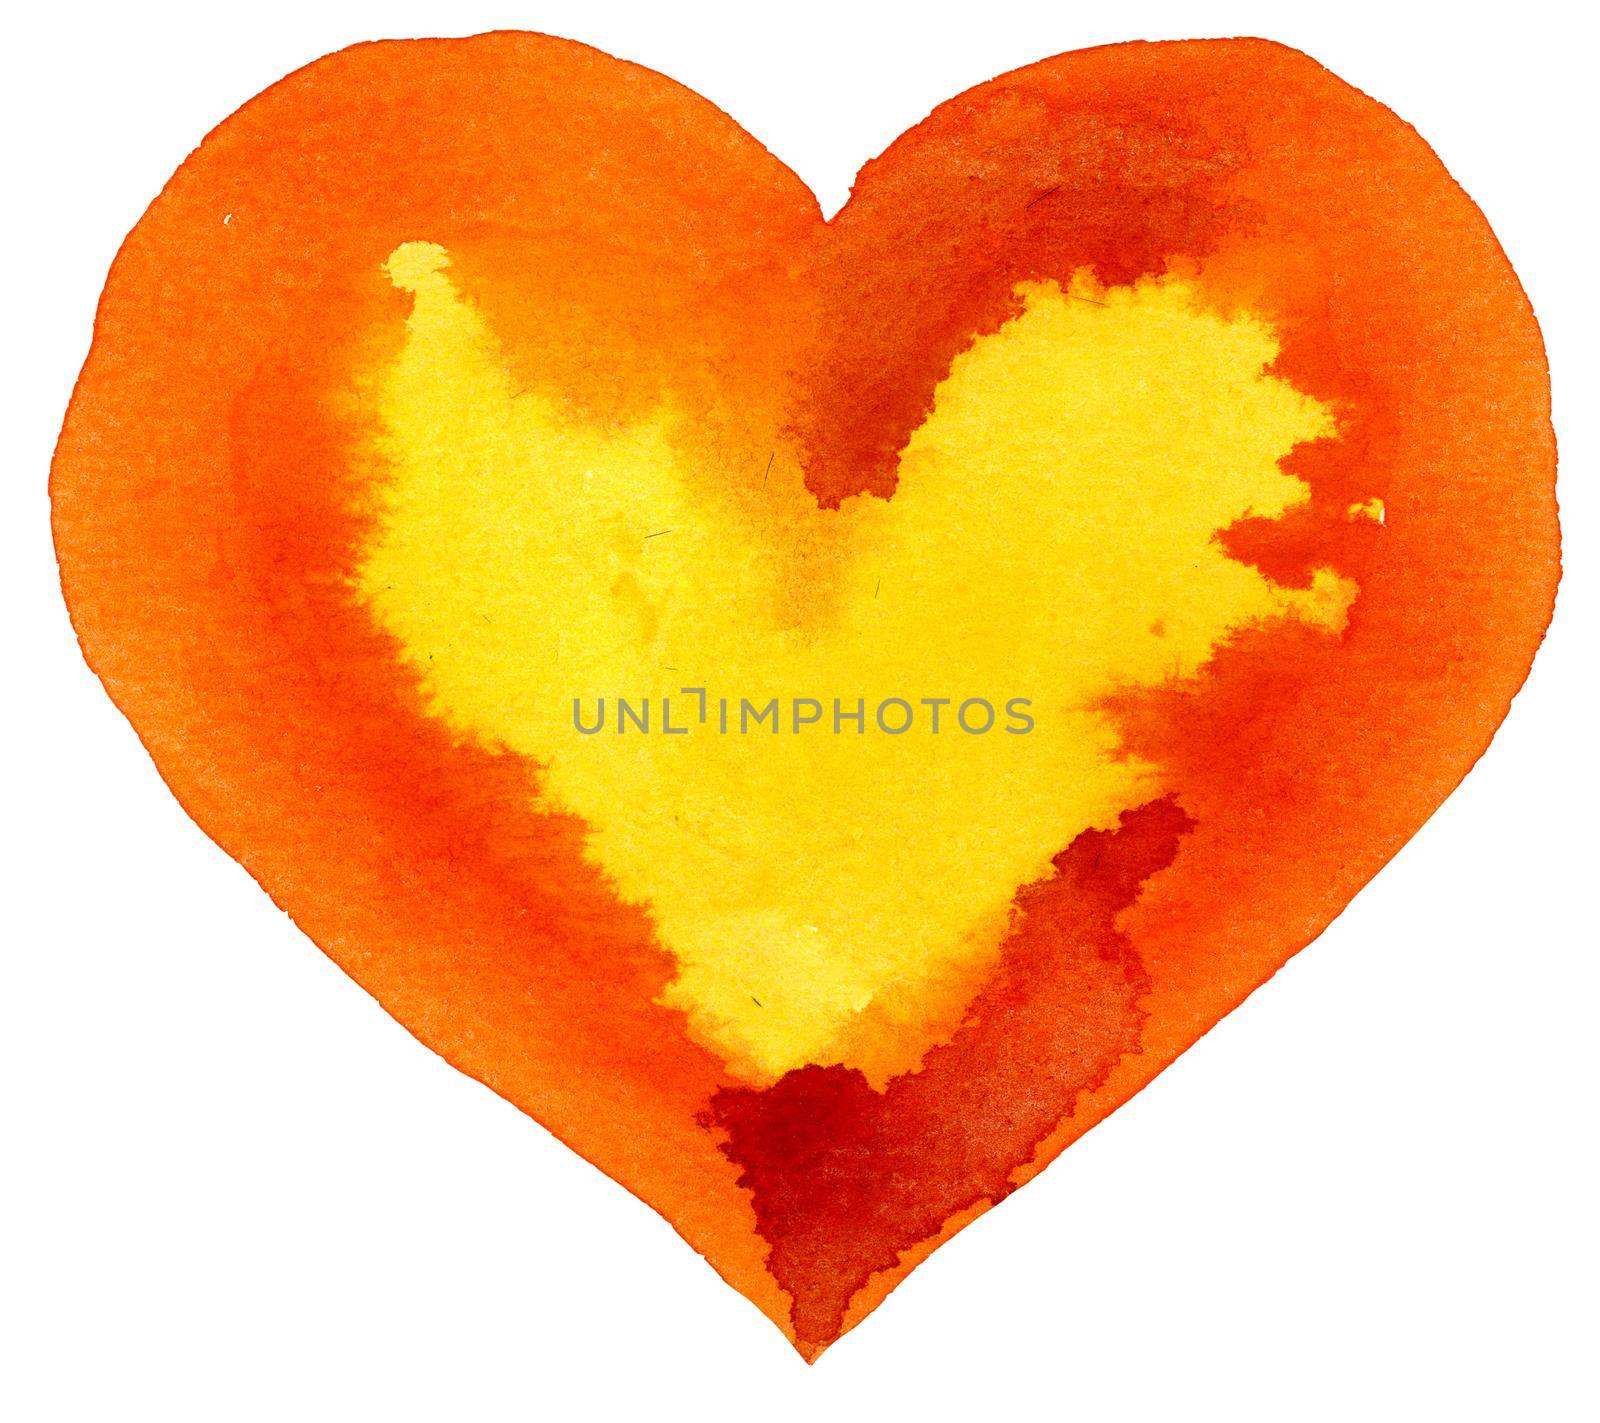 watercolor orange heart with yellow center by NataOmsk